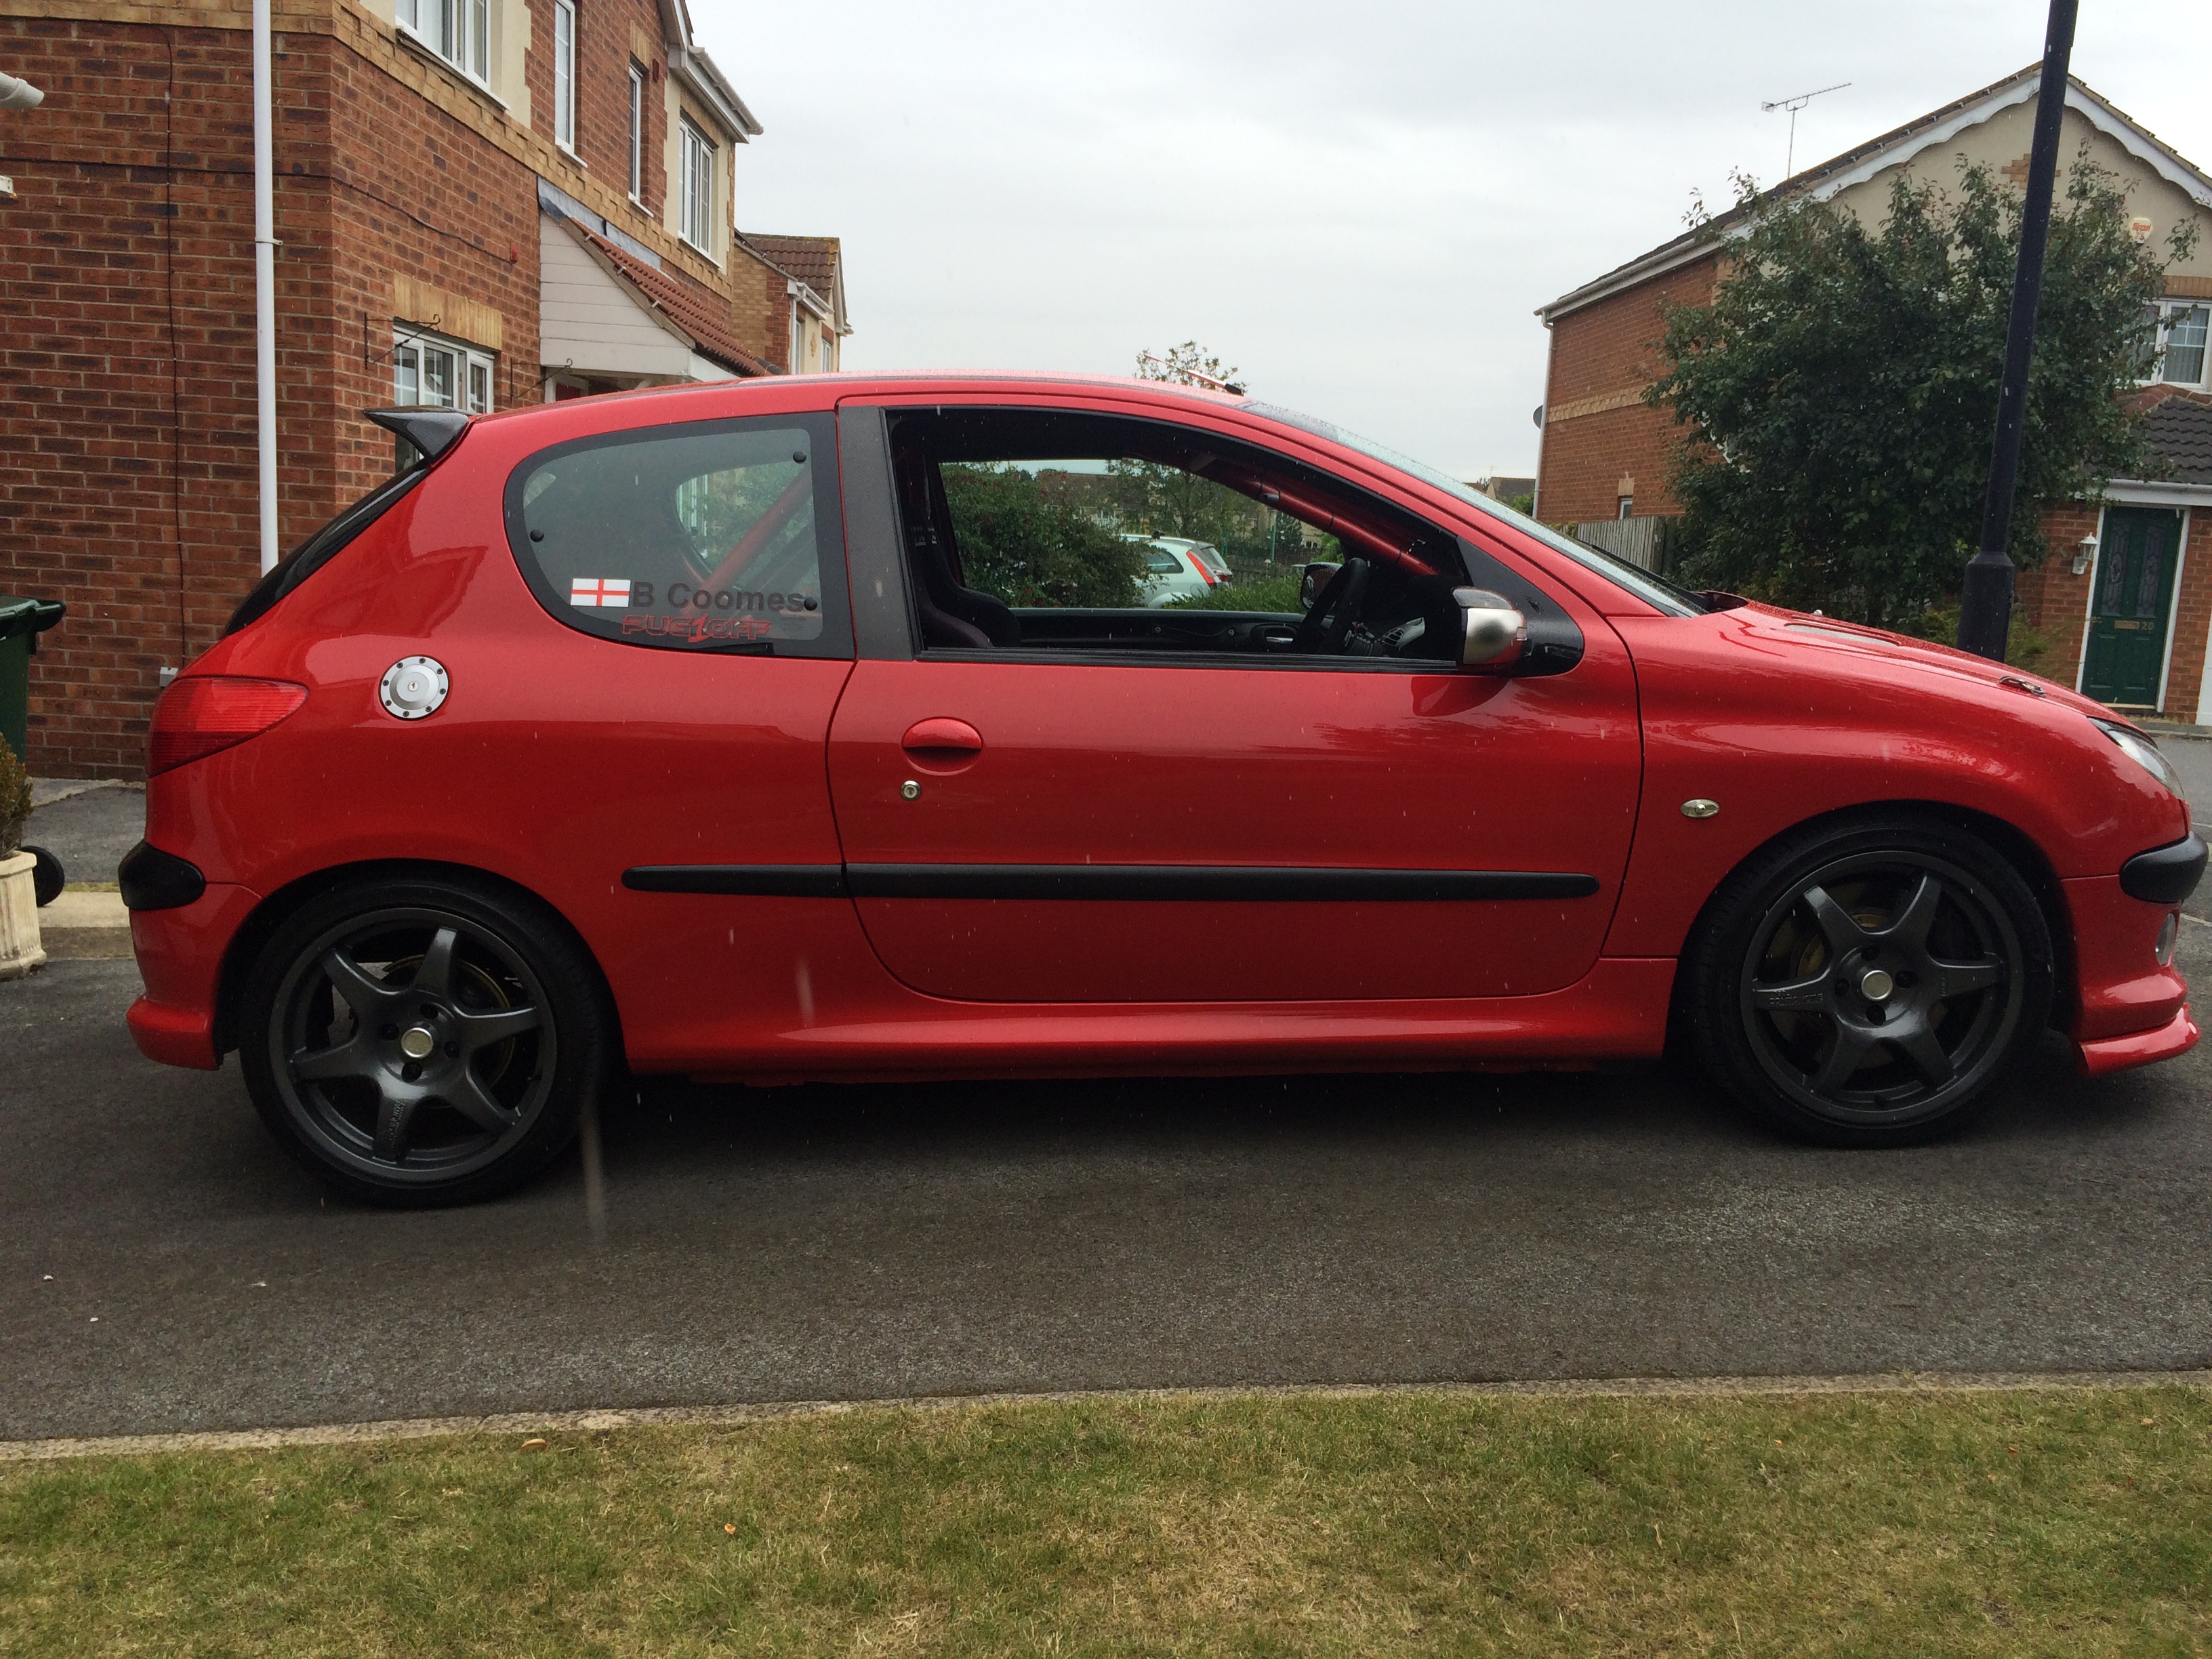 416bhp Peugeot 206 gti turbo Performance amp Trackday Cars for sale at 